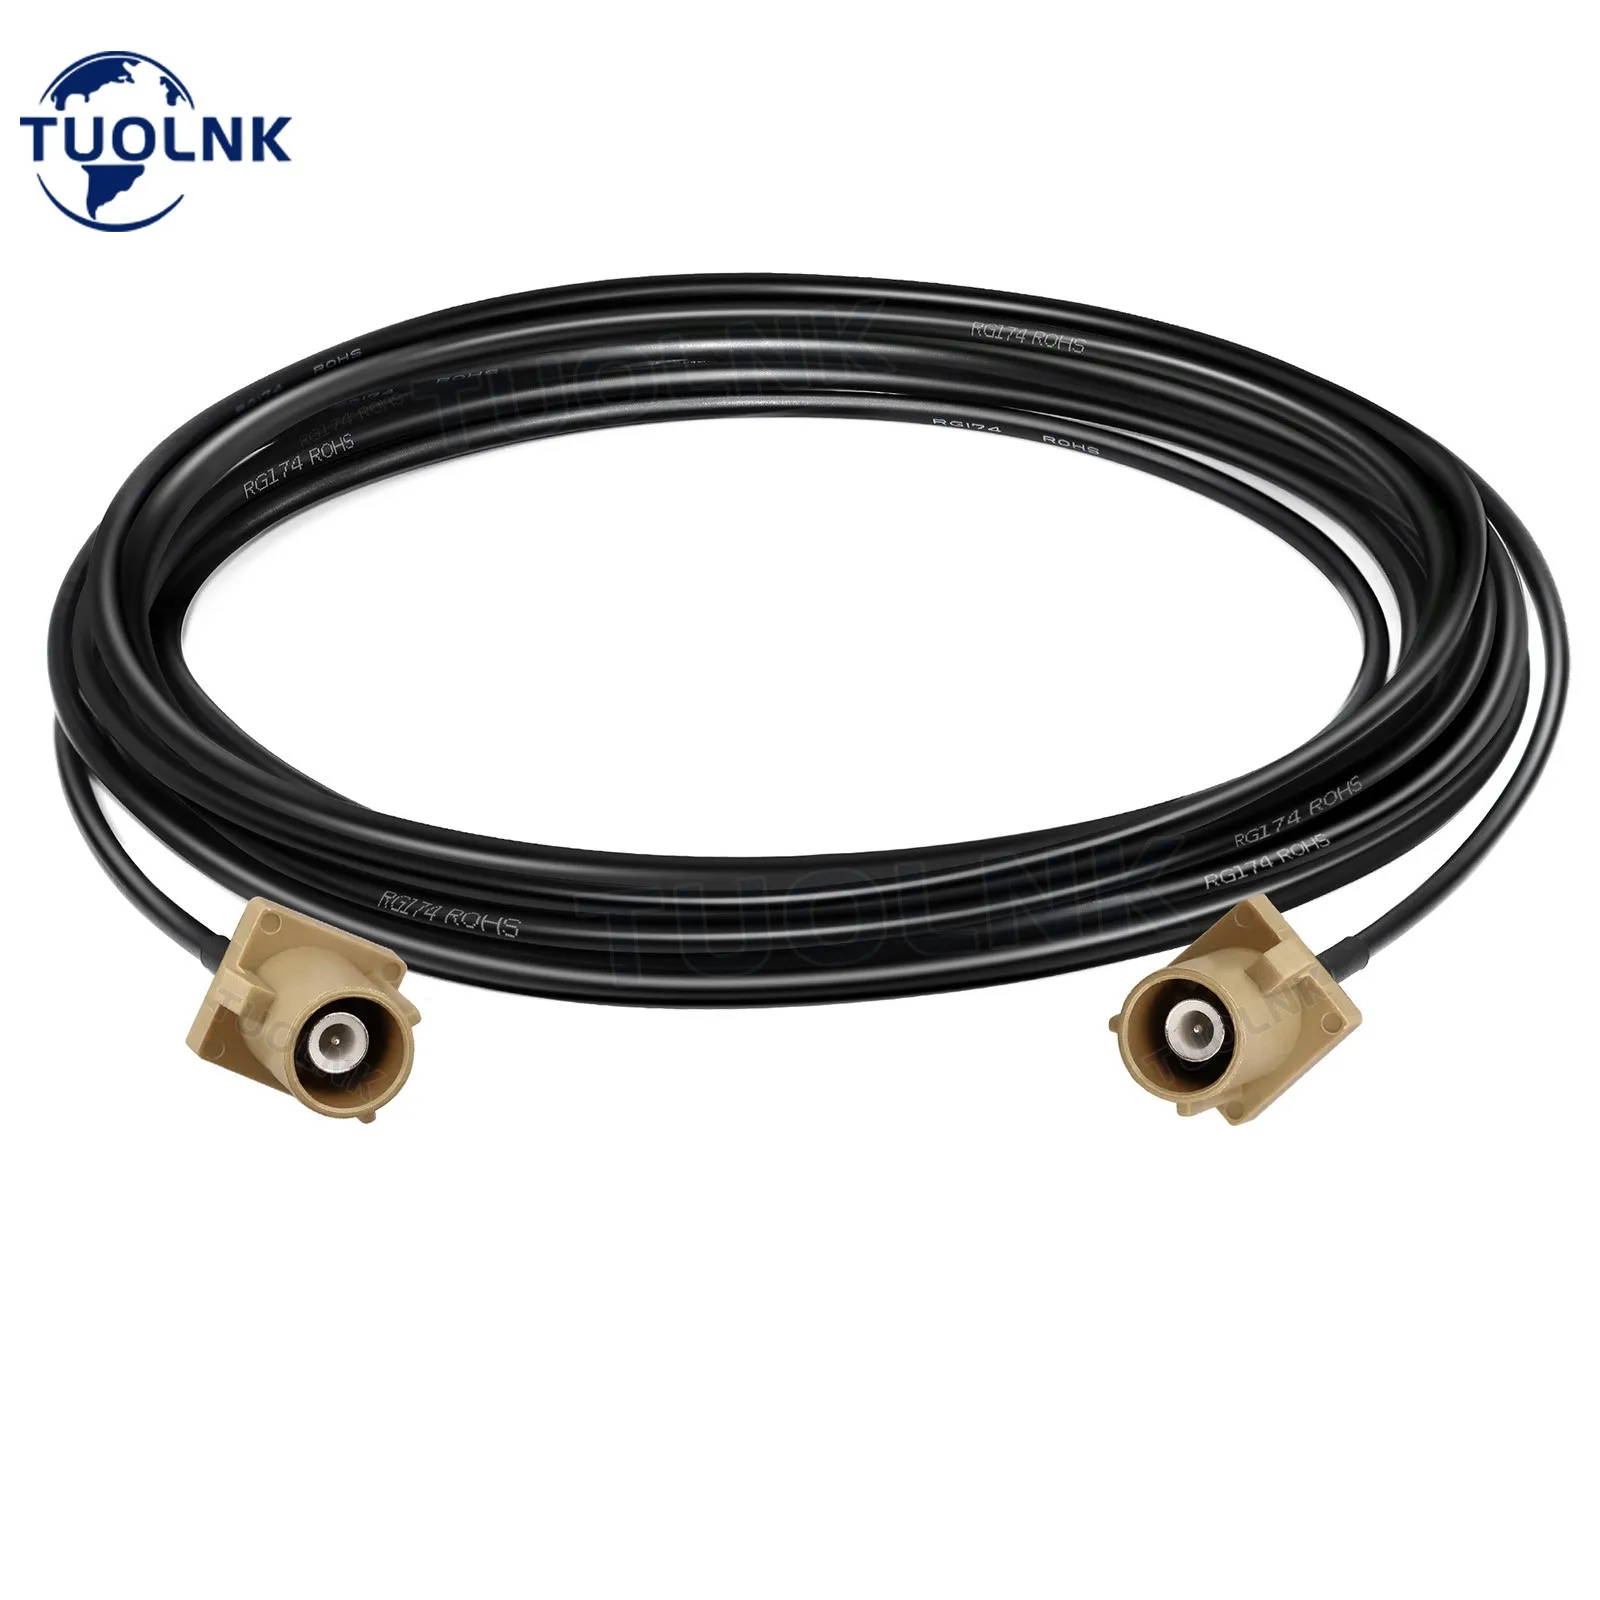 

1pcs Fakra I Coax Cable RG174 Fakra I Male to Male Antenna Extension Cable Coaxial Cable for Car Bluetooth Adapter